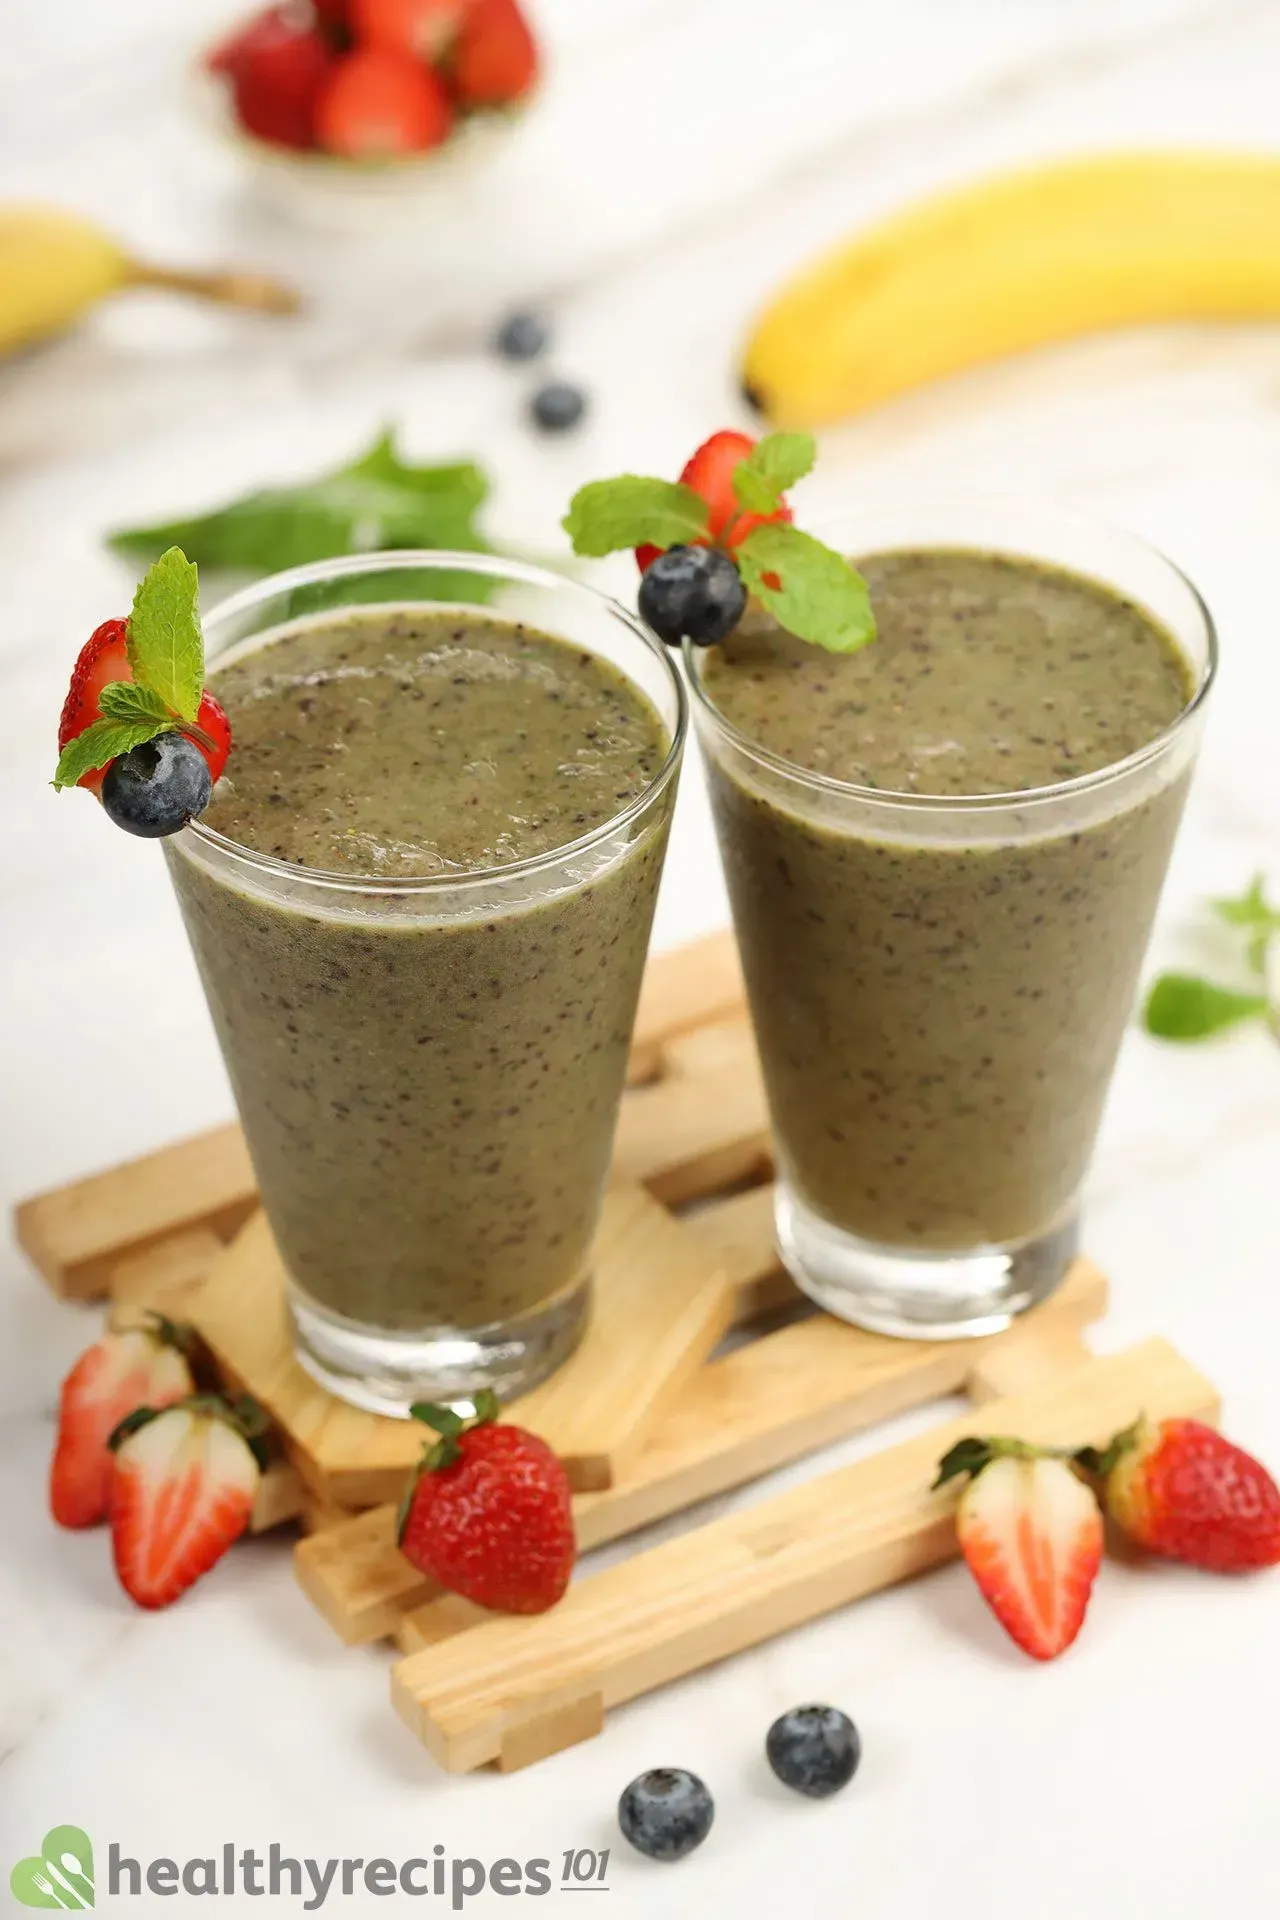 Spinach Berry Smoothie Recipe - A Healthy Drink That Tastes Great